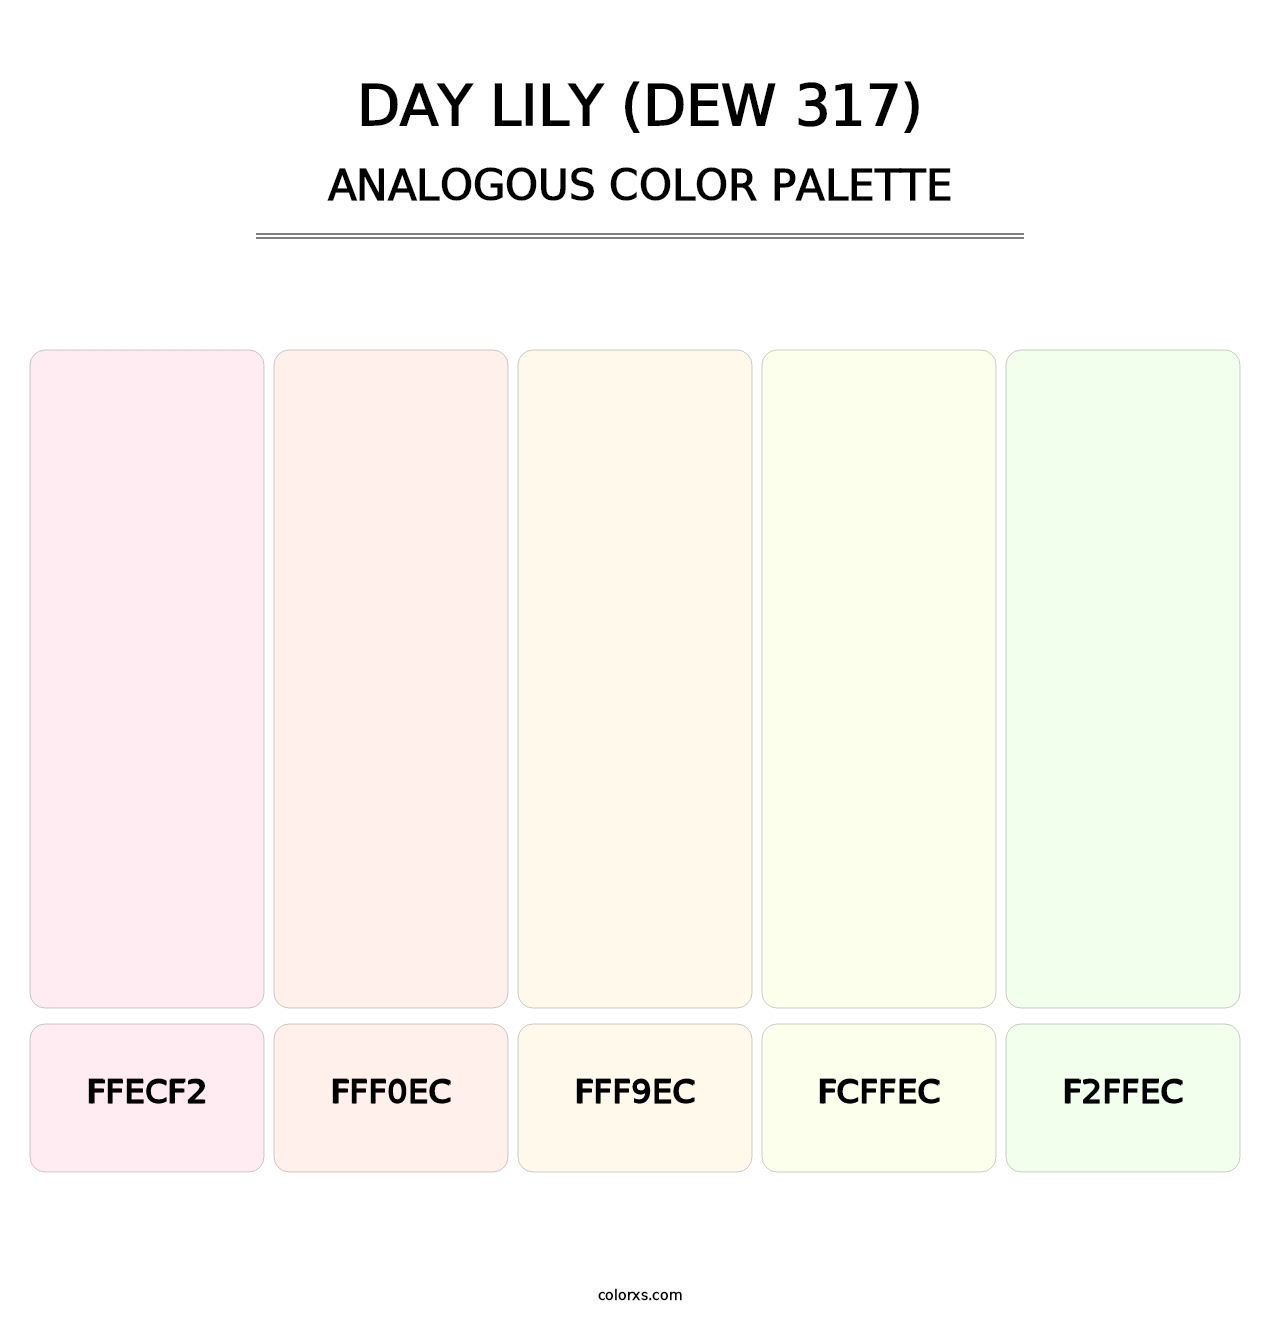 Day Lily (DEW 317) - Analogous Color Palette